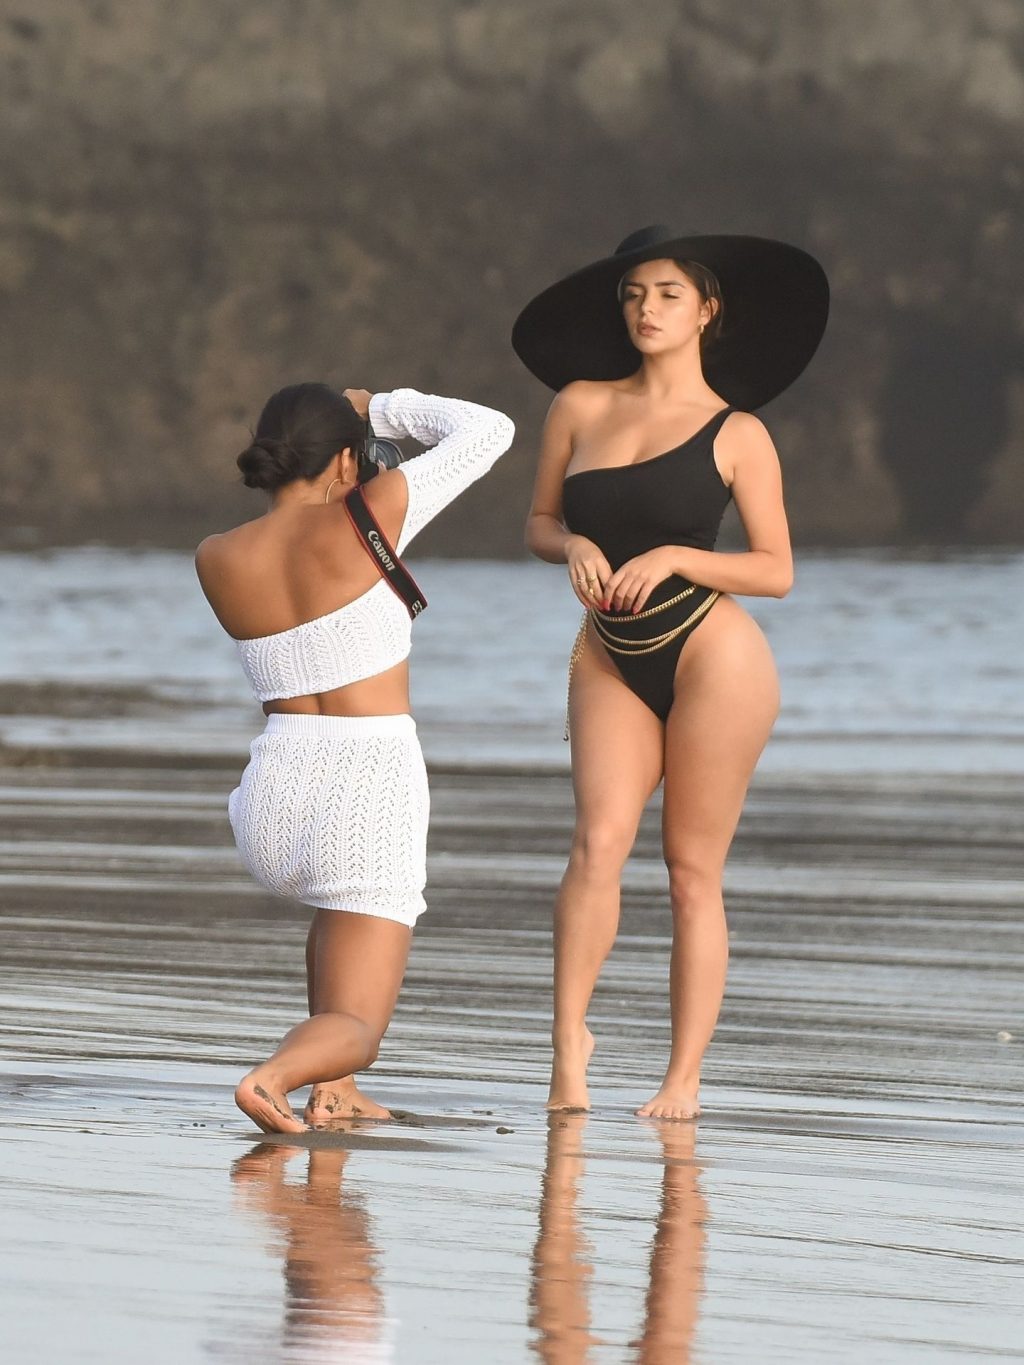 Demi Rose â€“ Spotted on the beach during a photoshoot in Bali Indonesia